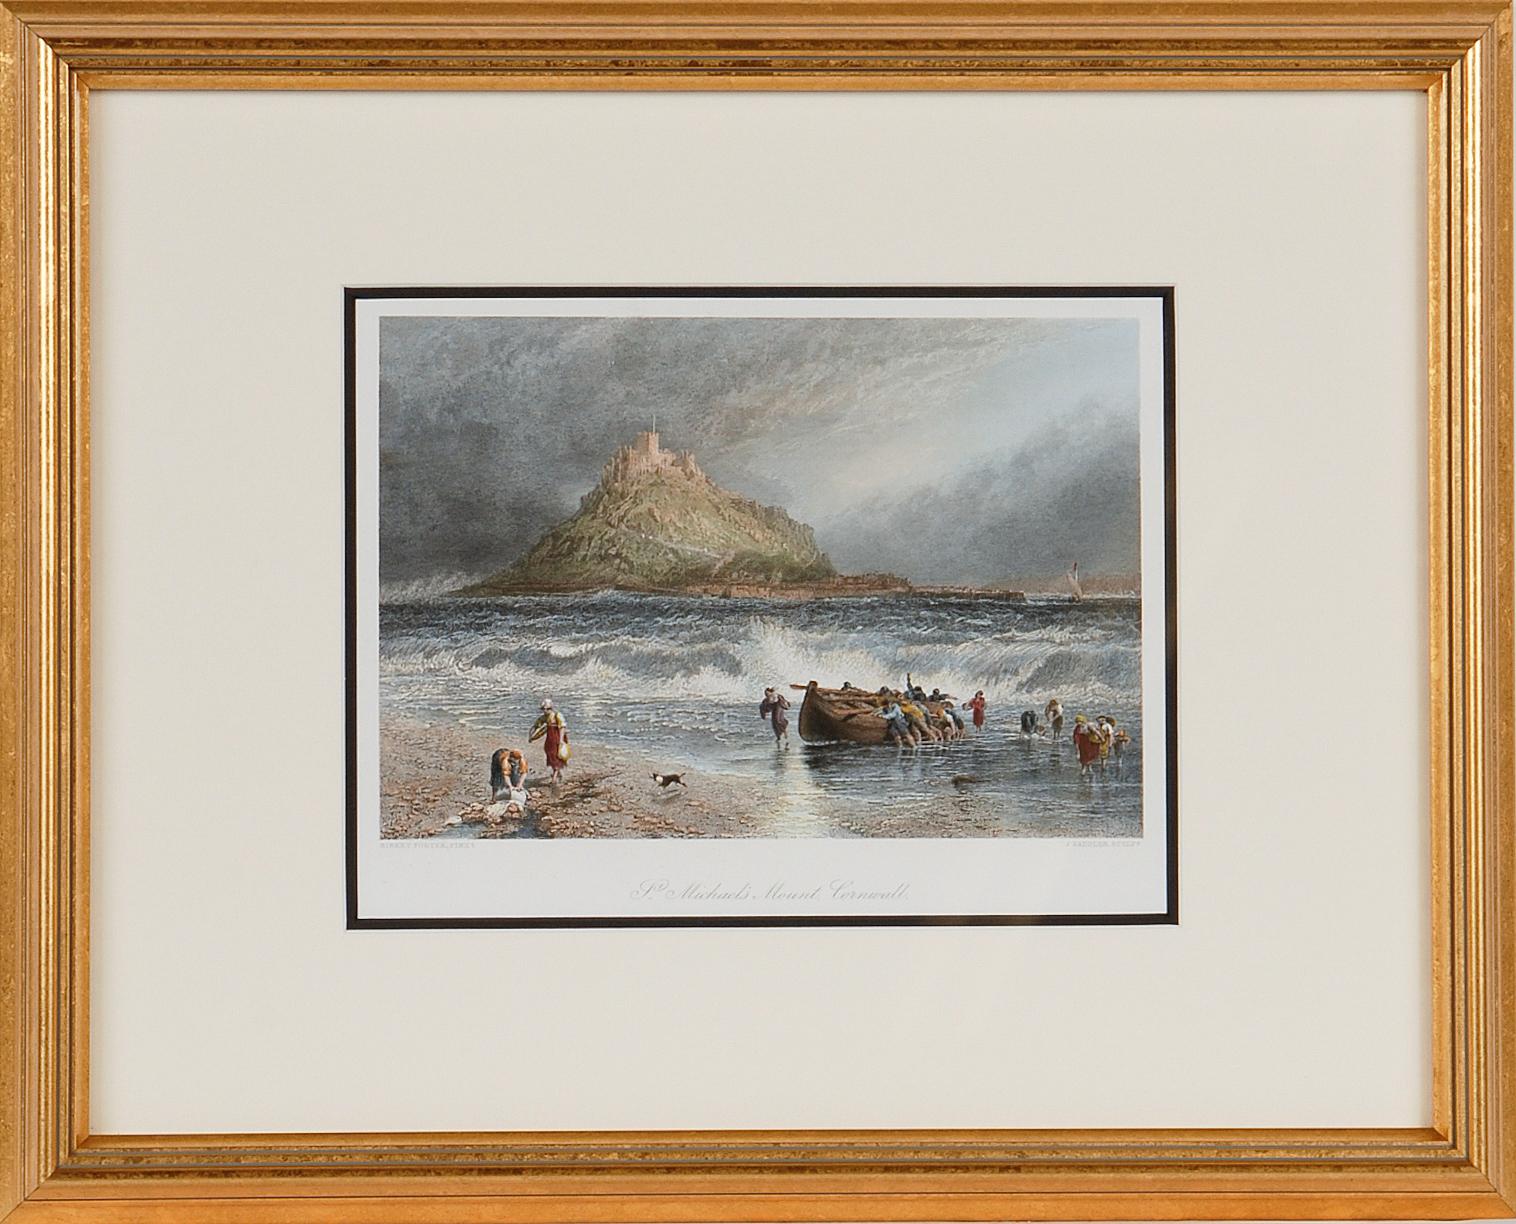 St. Michael's Mount, Cornwall: A Framed 19th C. Engraving After Myles Foster